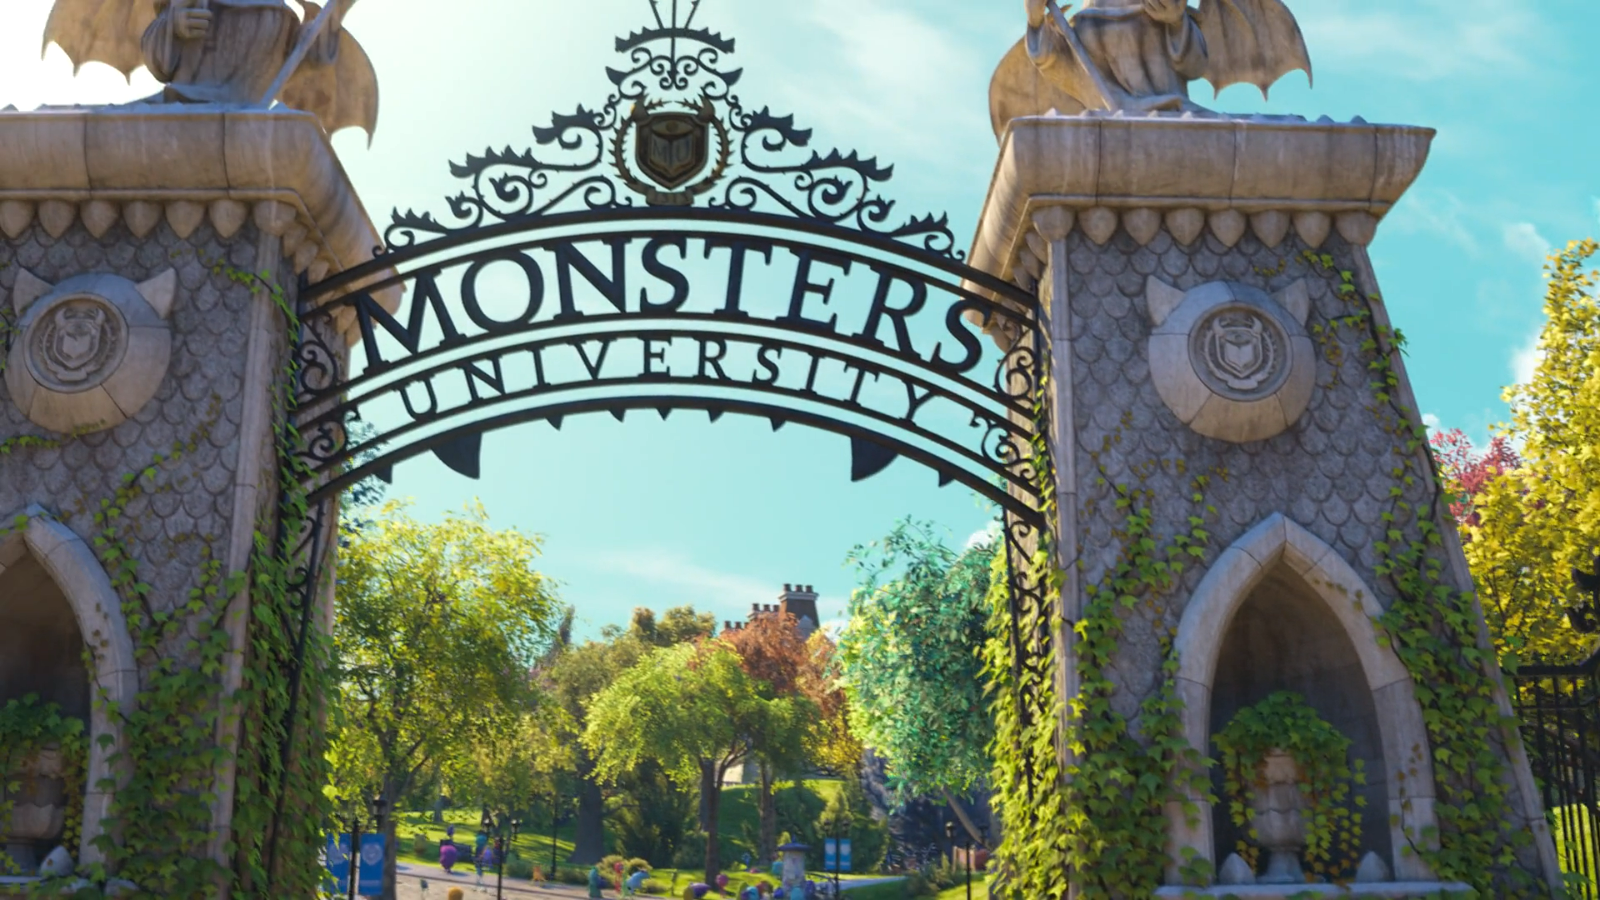 Monsters University Movie Review